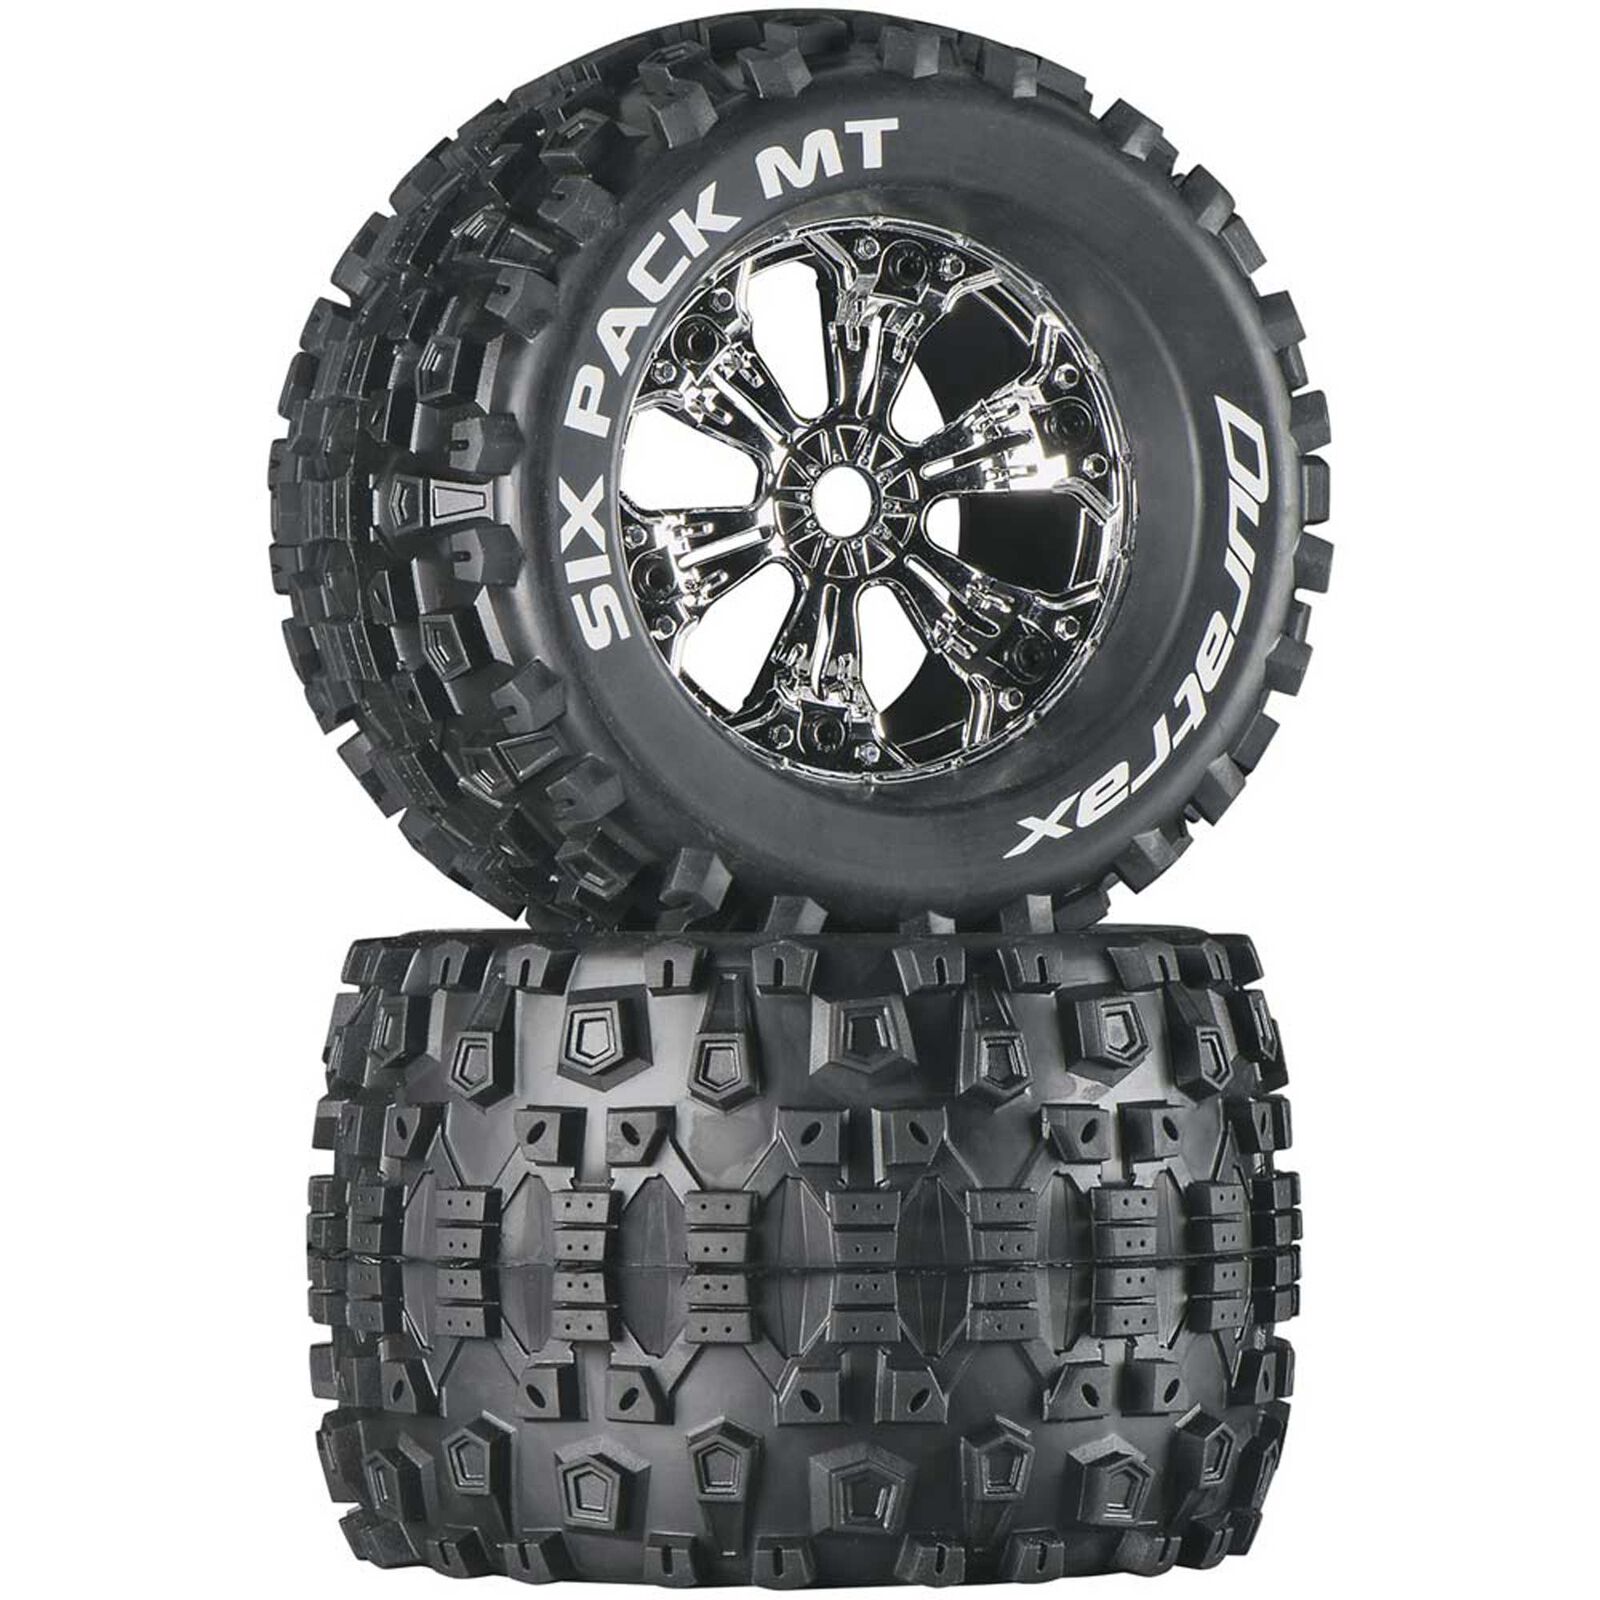 Six-Pack MT 3.8" Mounted Tires, Chrome (2)